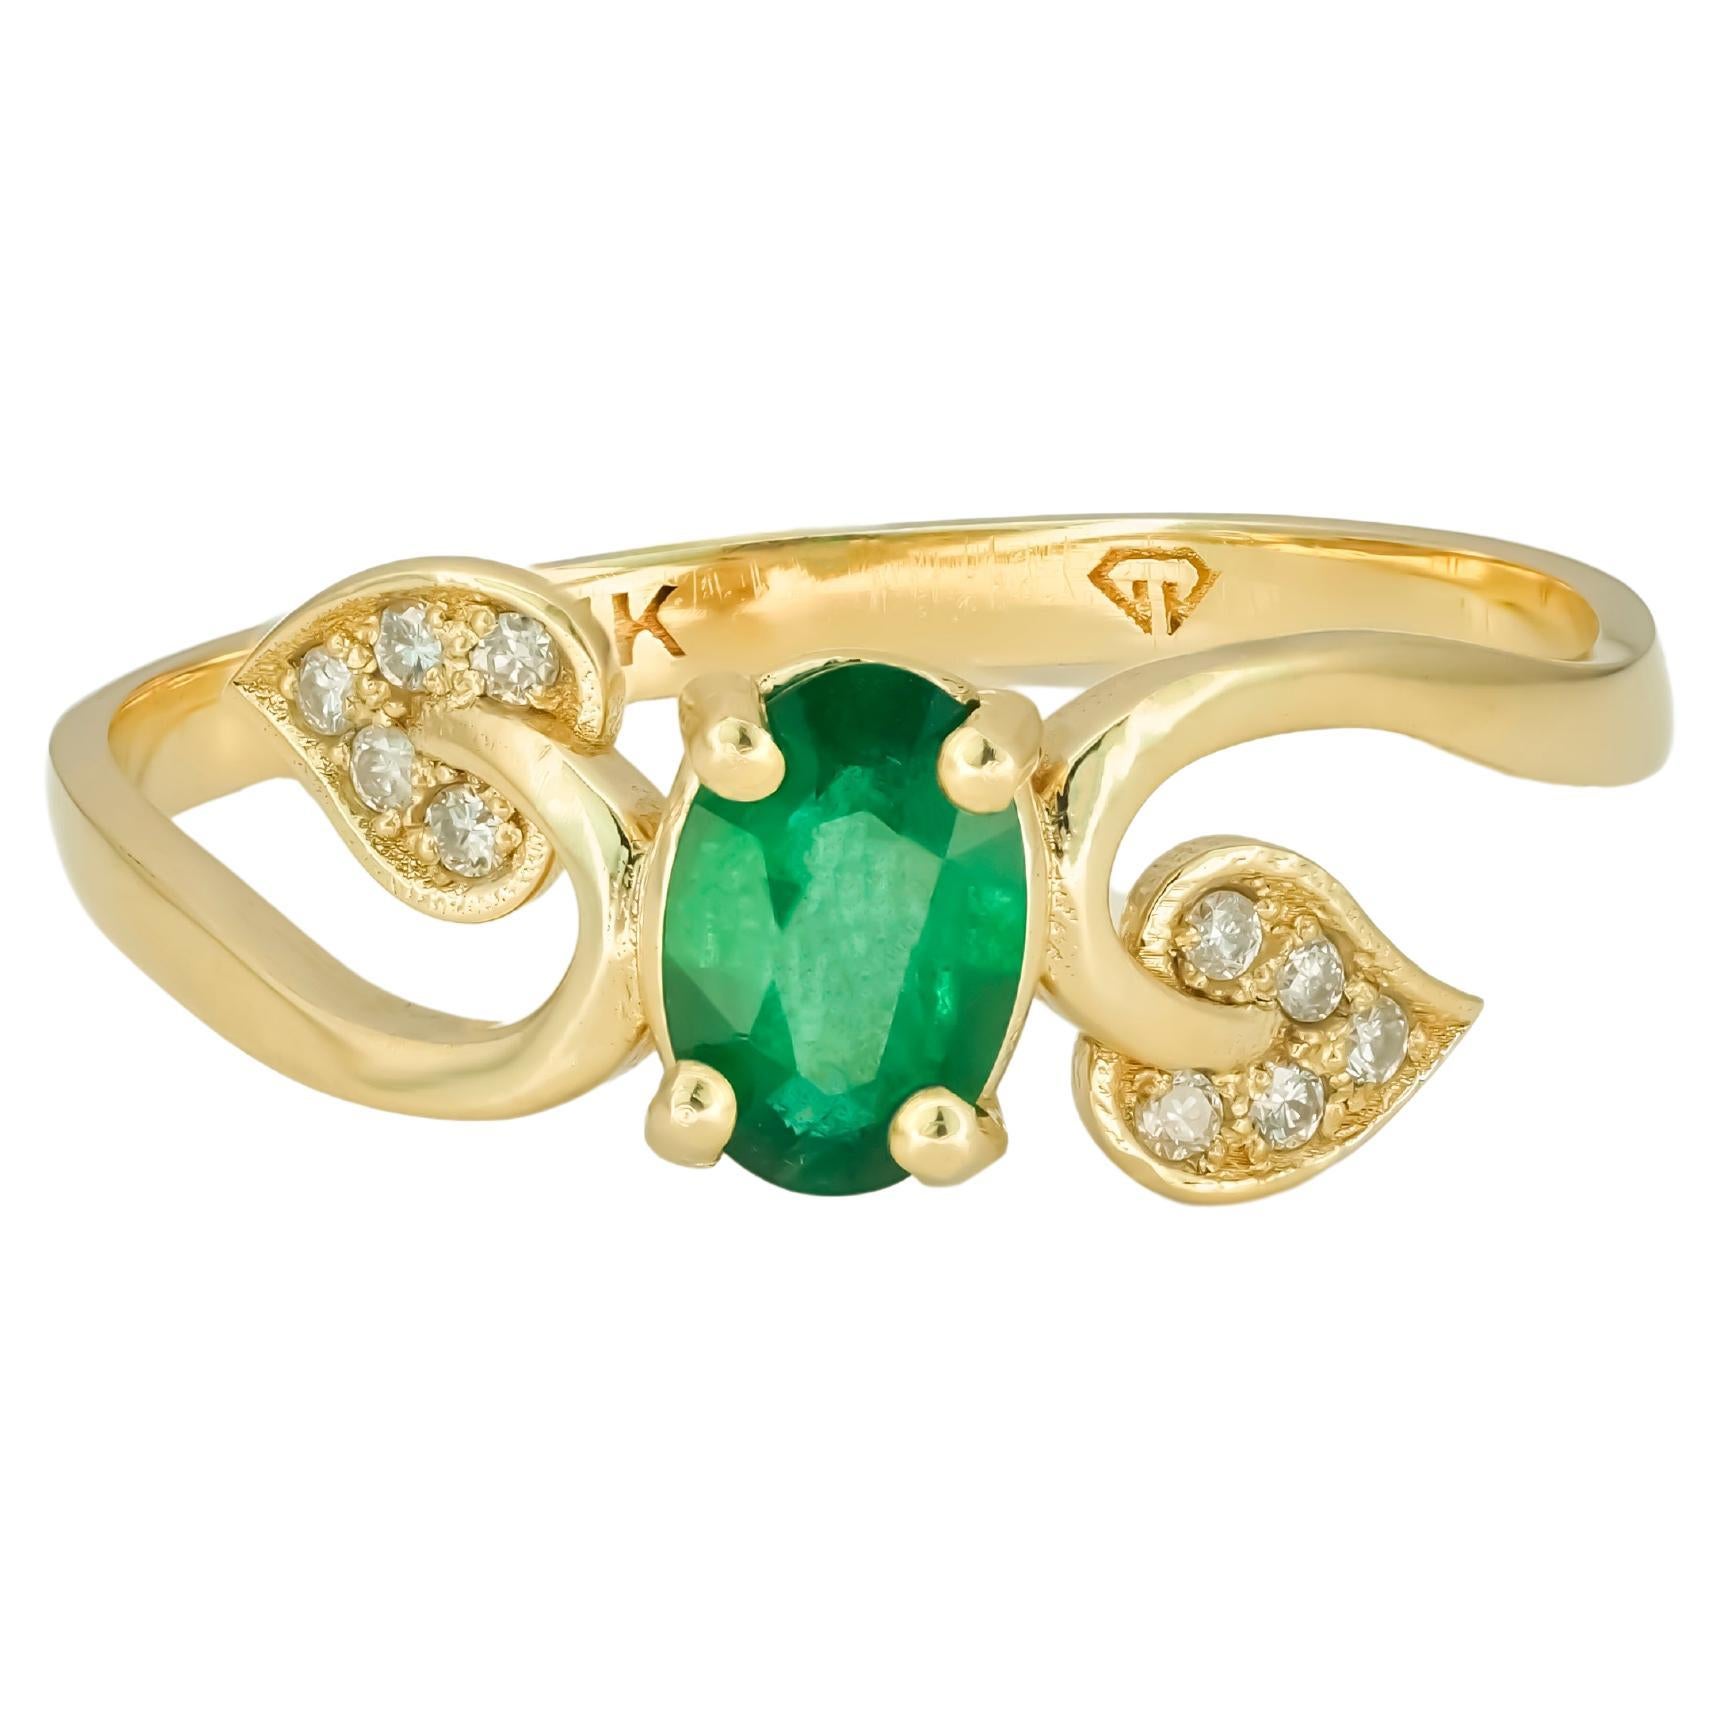 For Sale:  Genuine Emerald 14k Gold Ring, Emerald Engagement Ring!